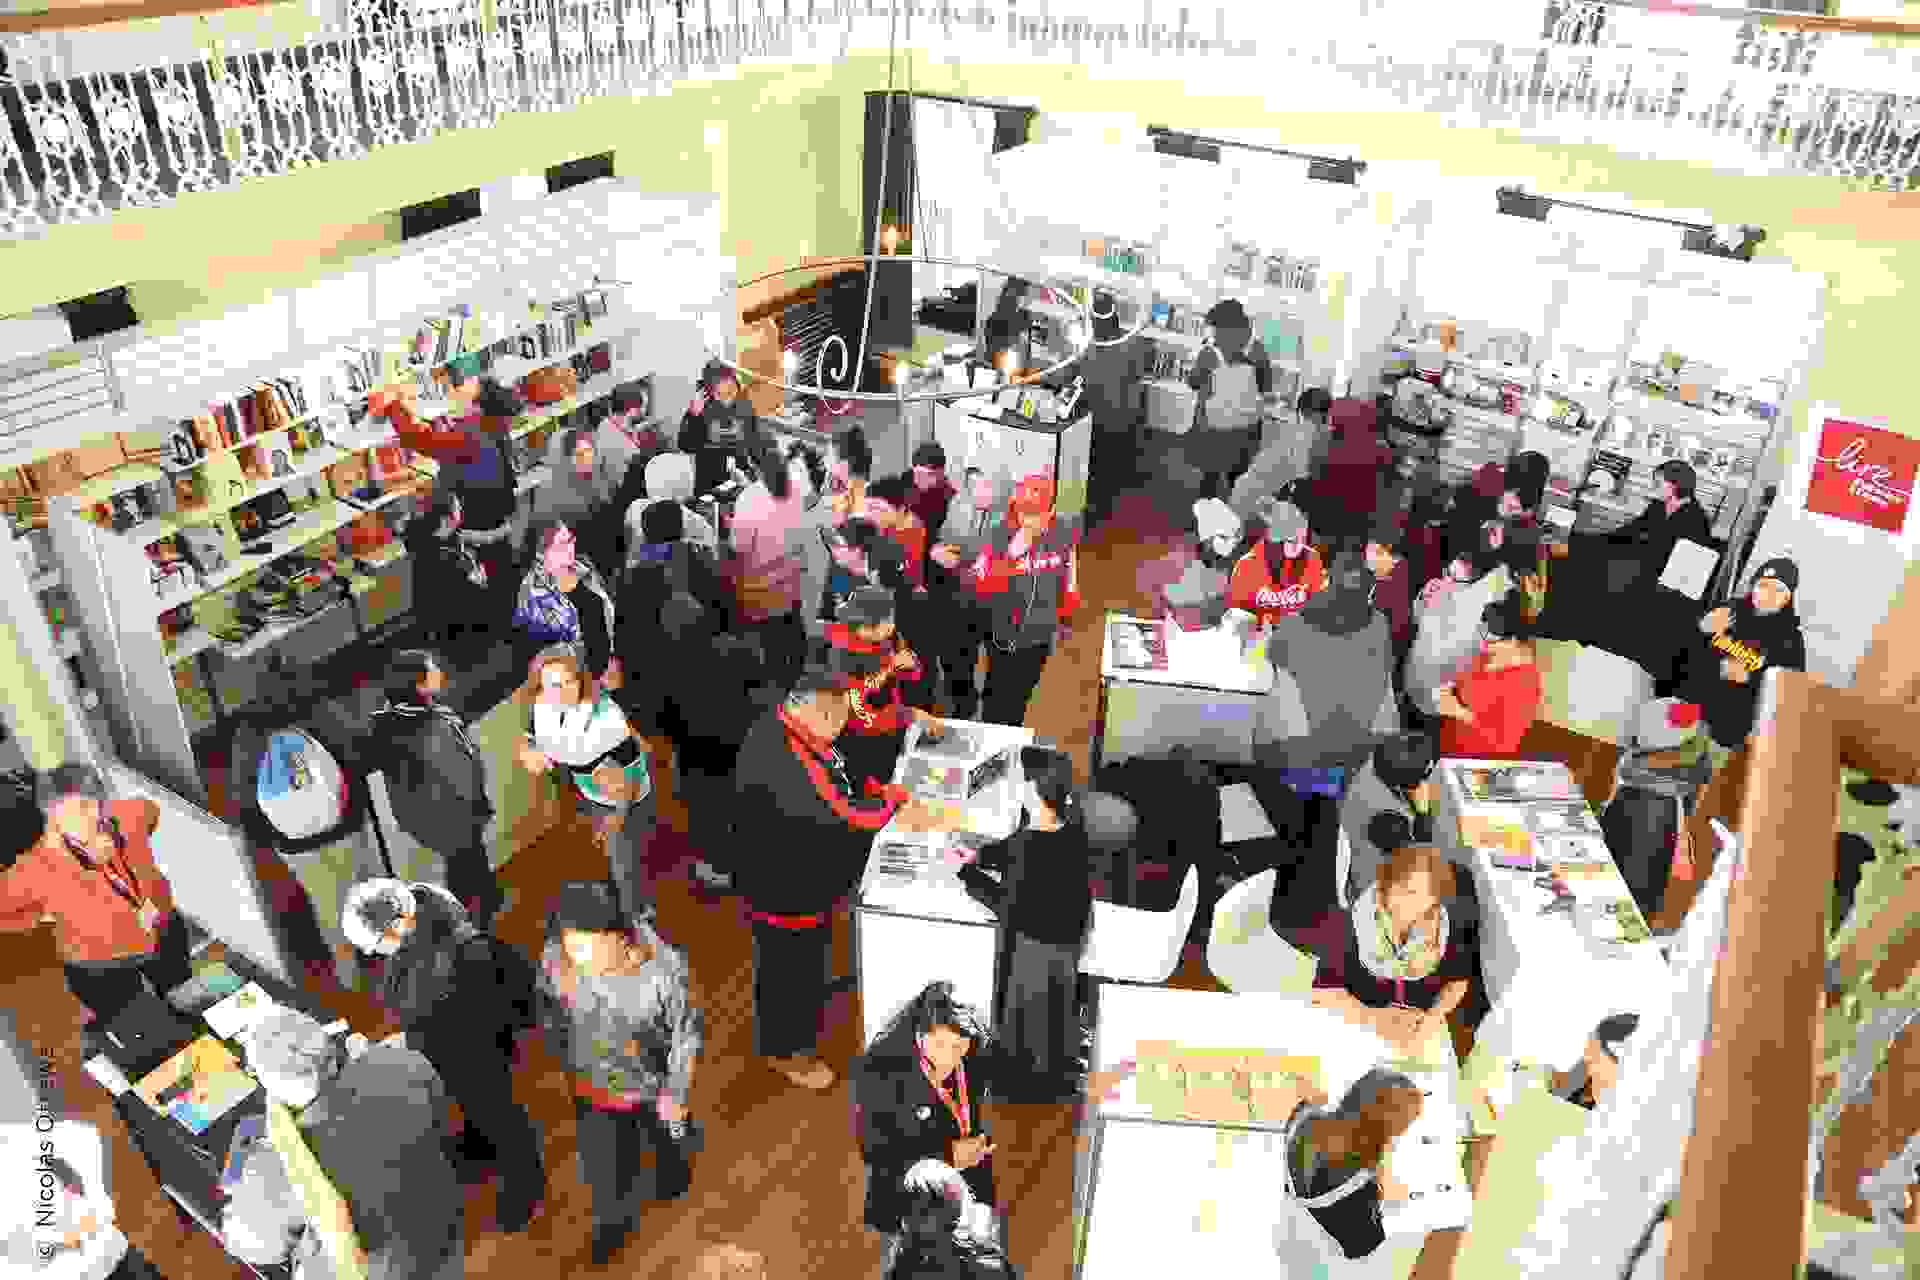 The First Nations Book Fair